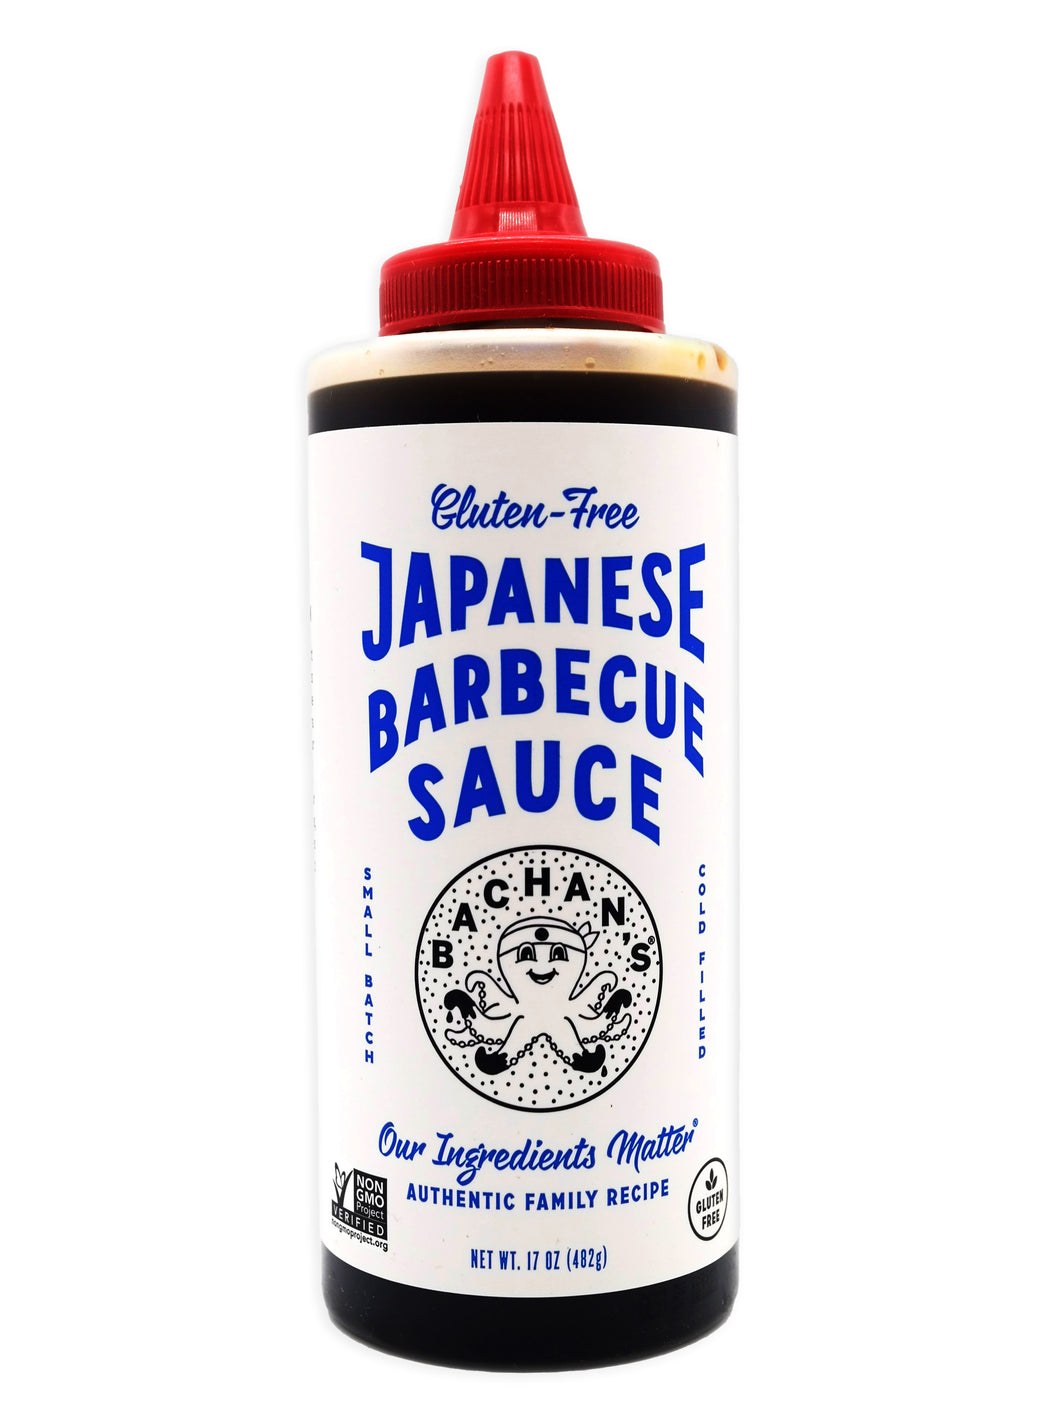 Bachan's Japanese Barbecue Sauce - Gluten Free